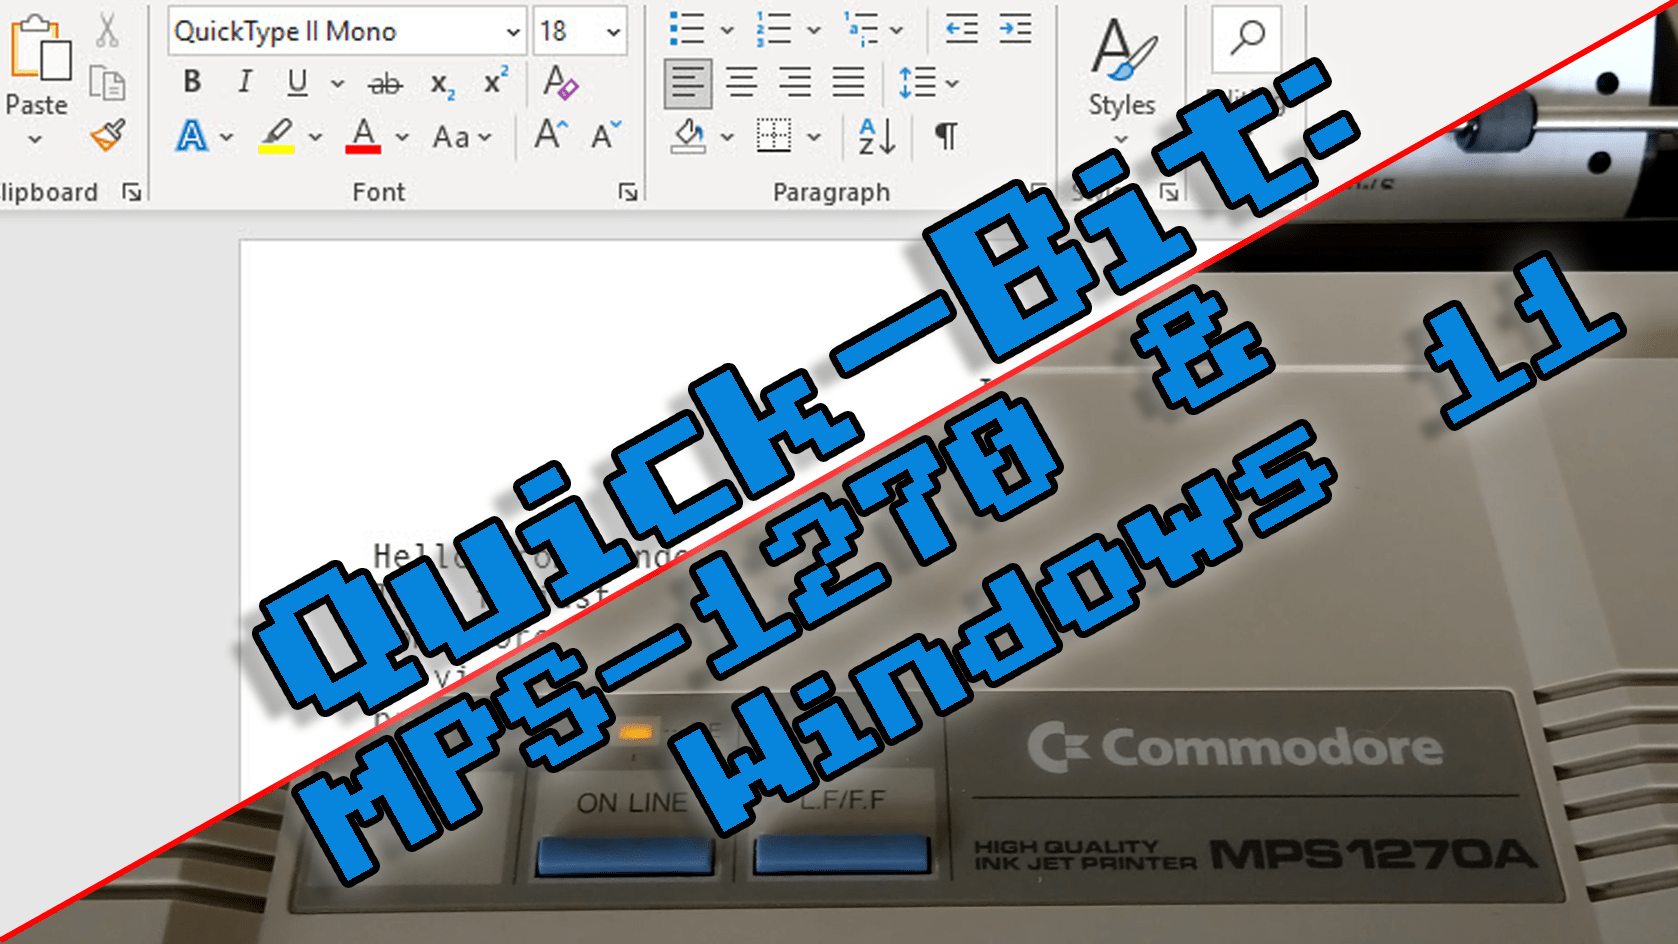 Windows printing on MPS-1270A